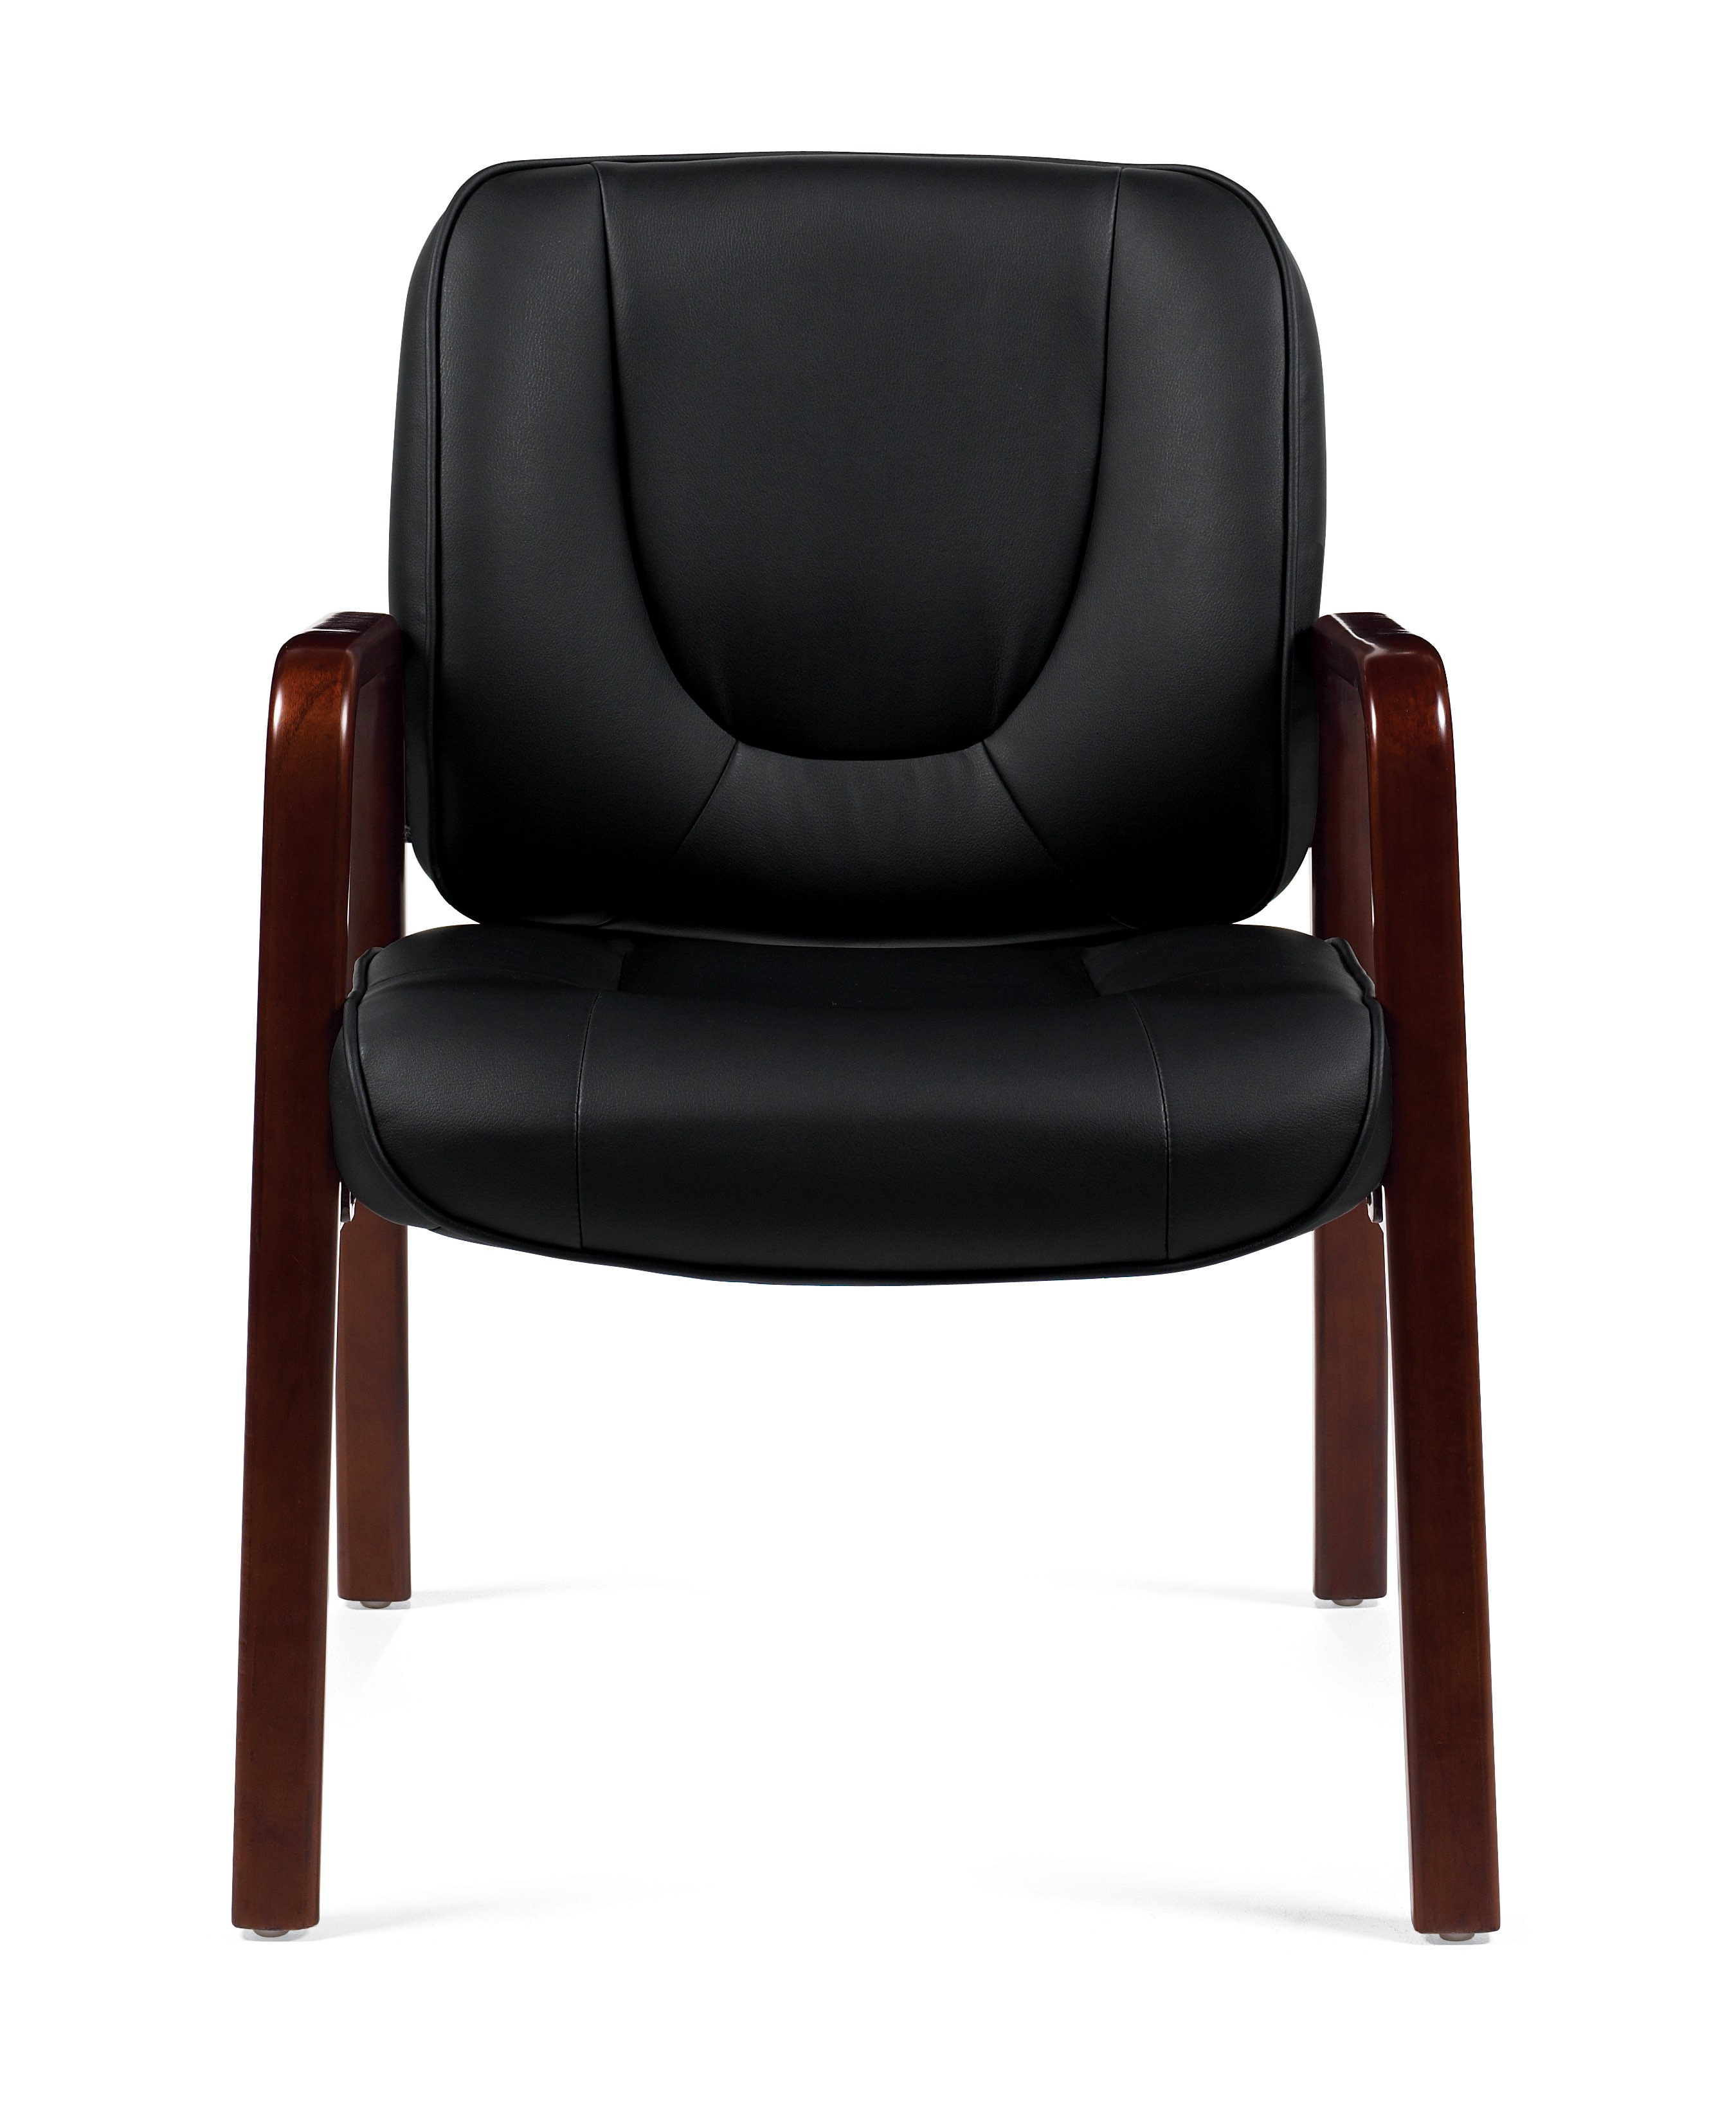 Luxhide Guest Chair with Wood Accents ﻿